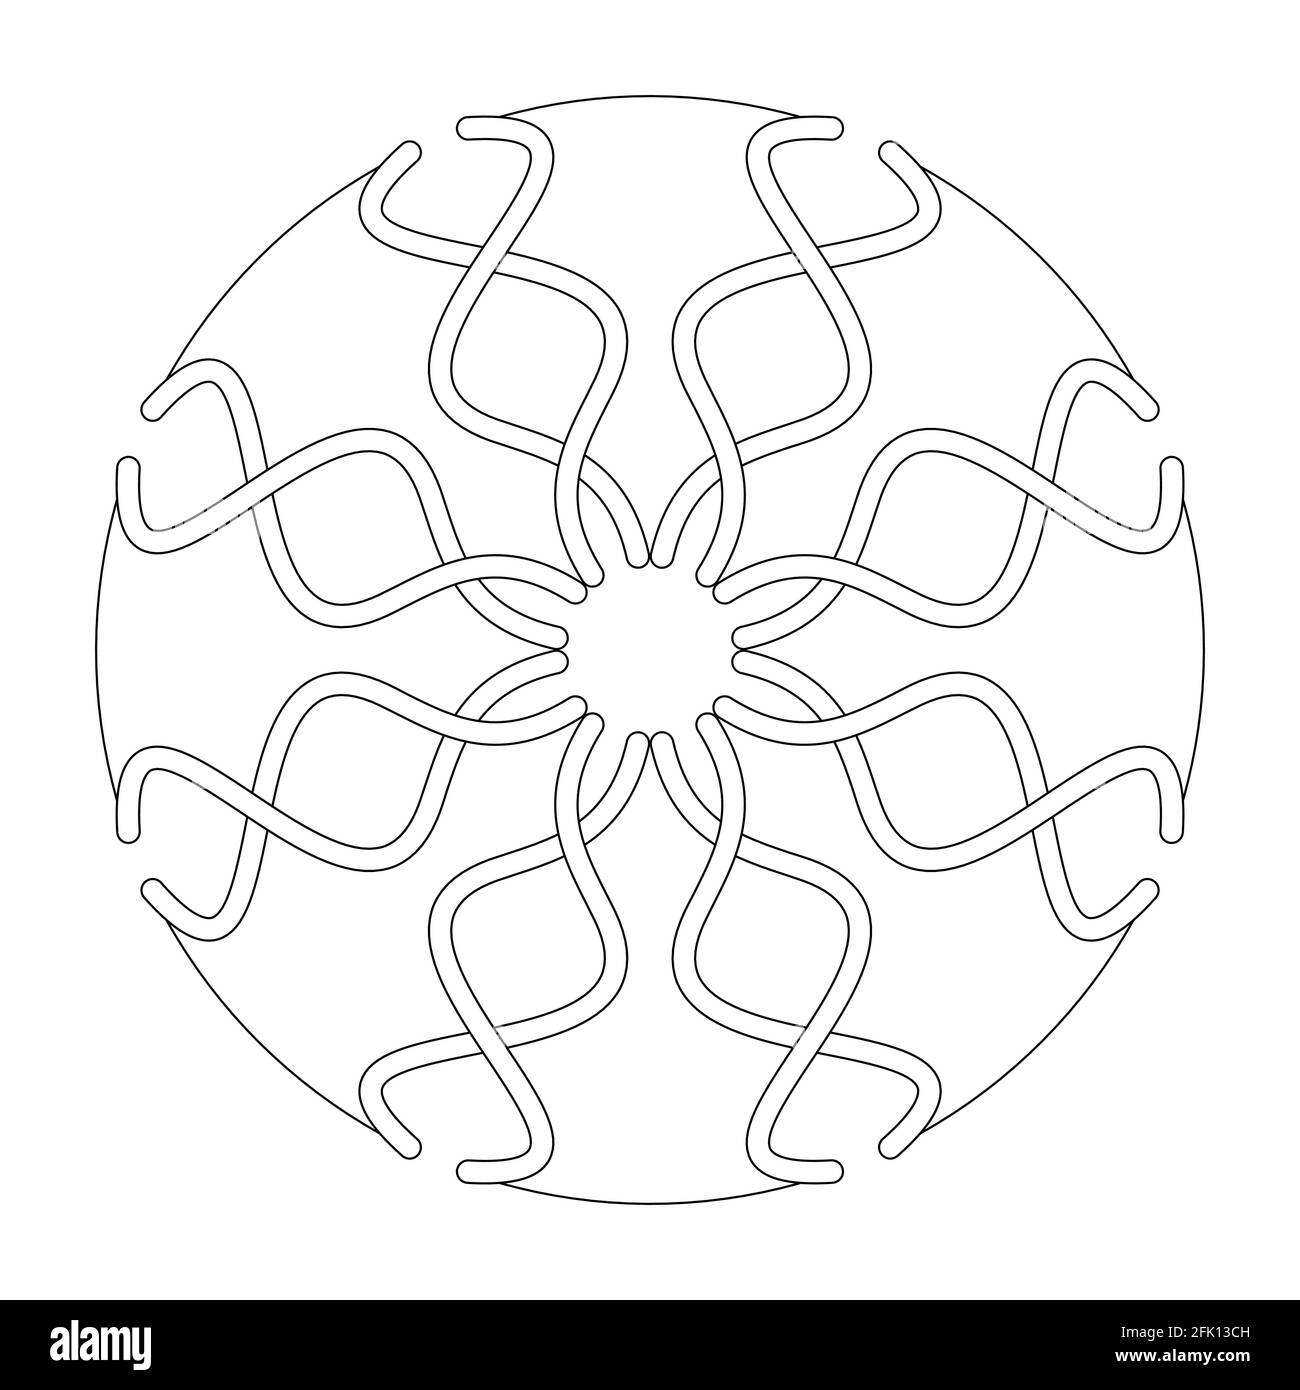 Mandala coloring page. Abstract and interlaced curve. Art Therapy. Anti-stress. Vector illustration black and white. Stock Vector